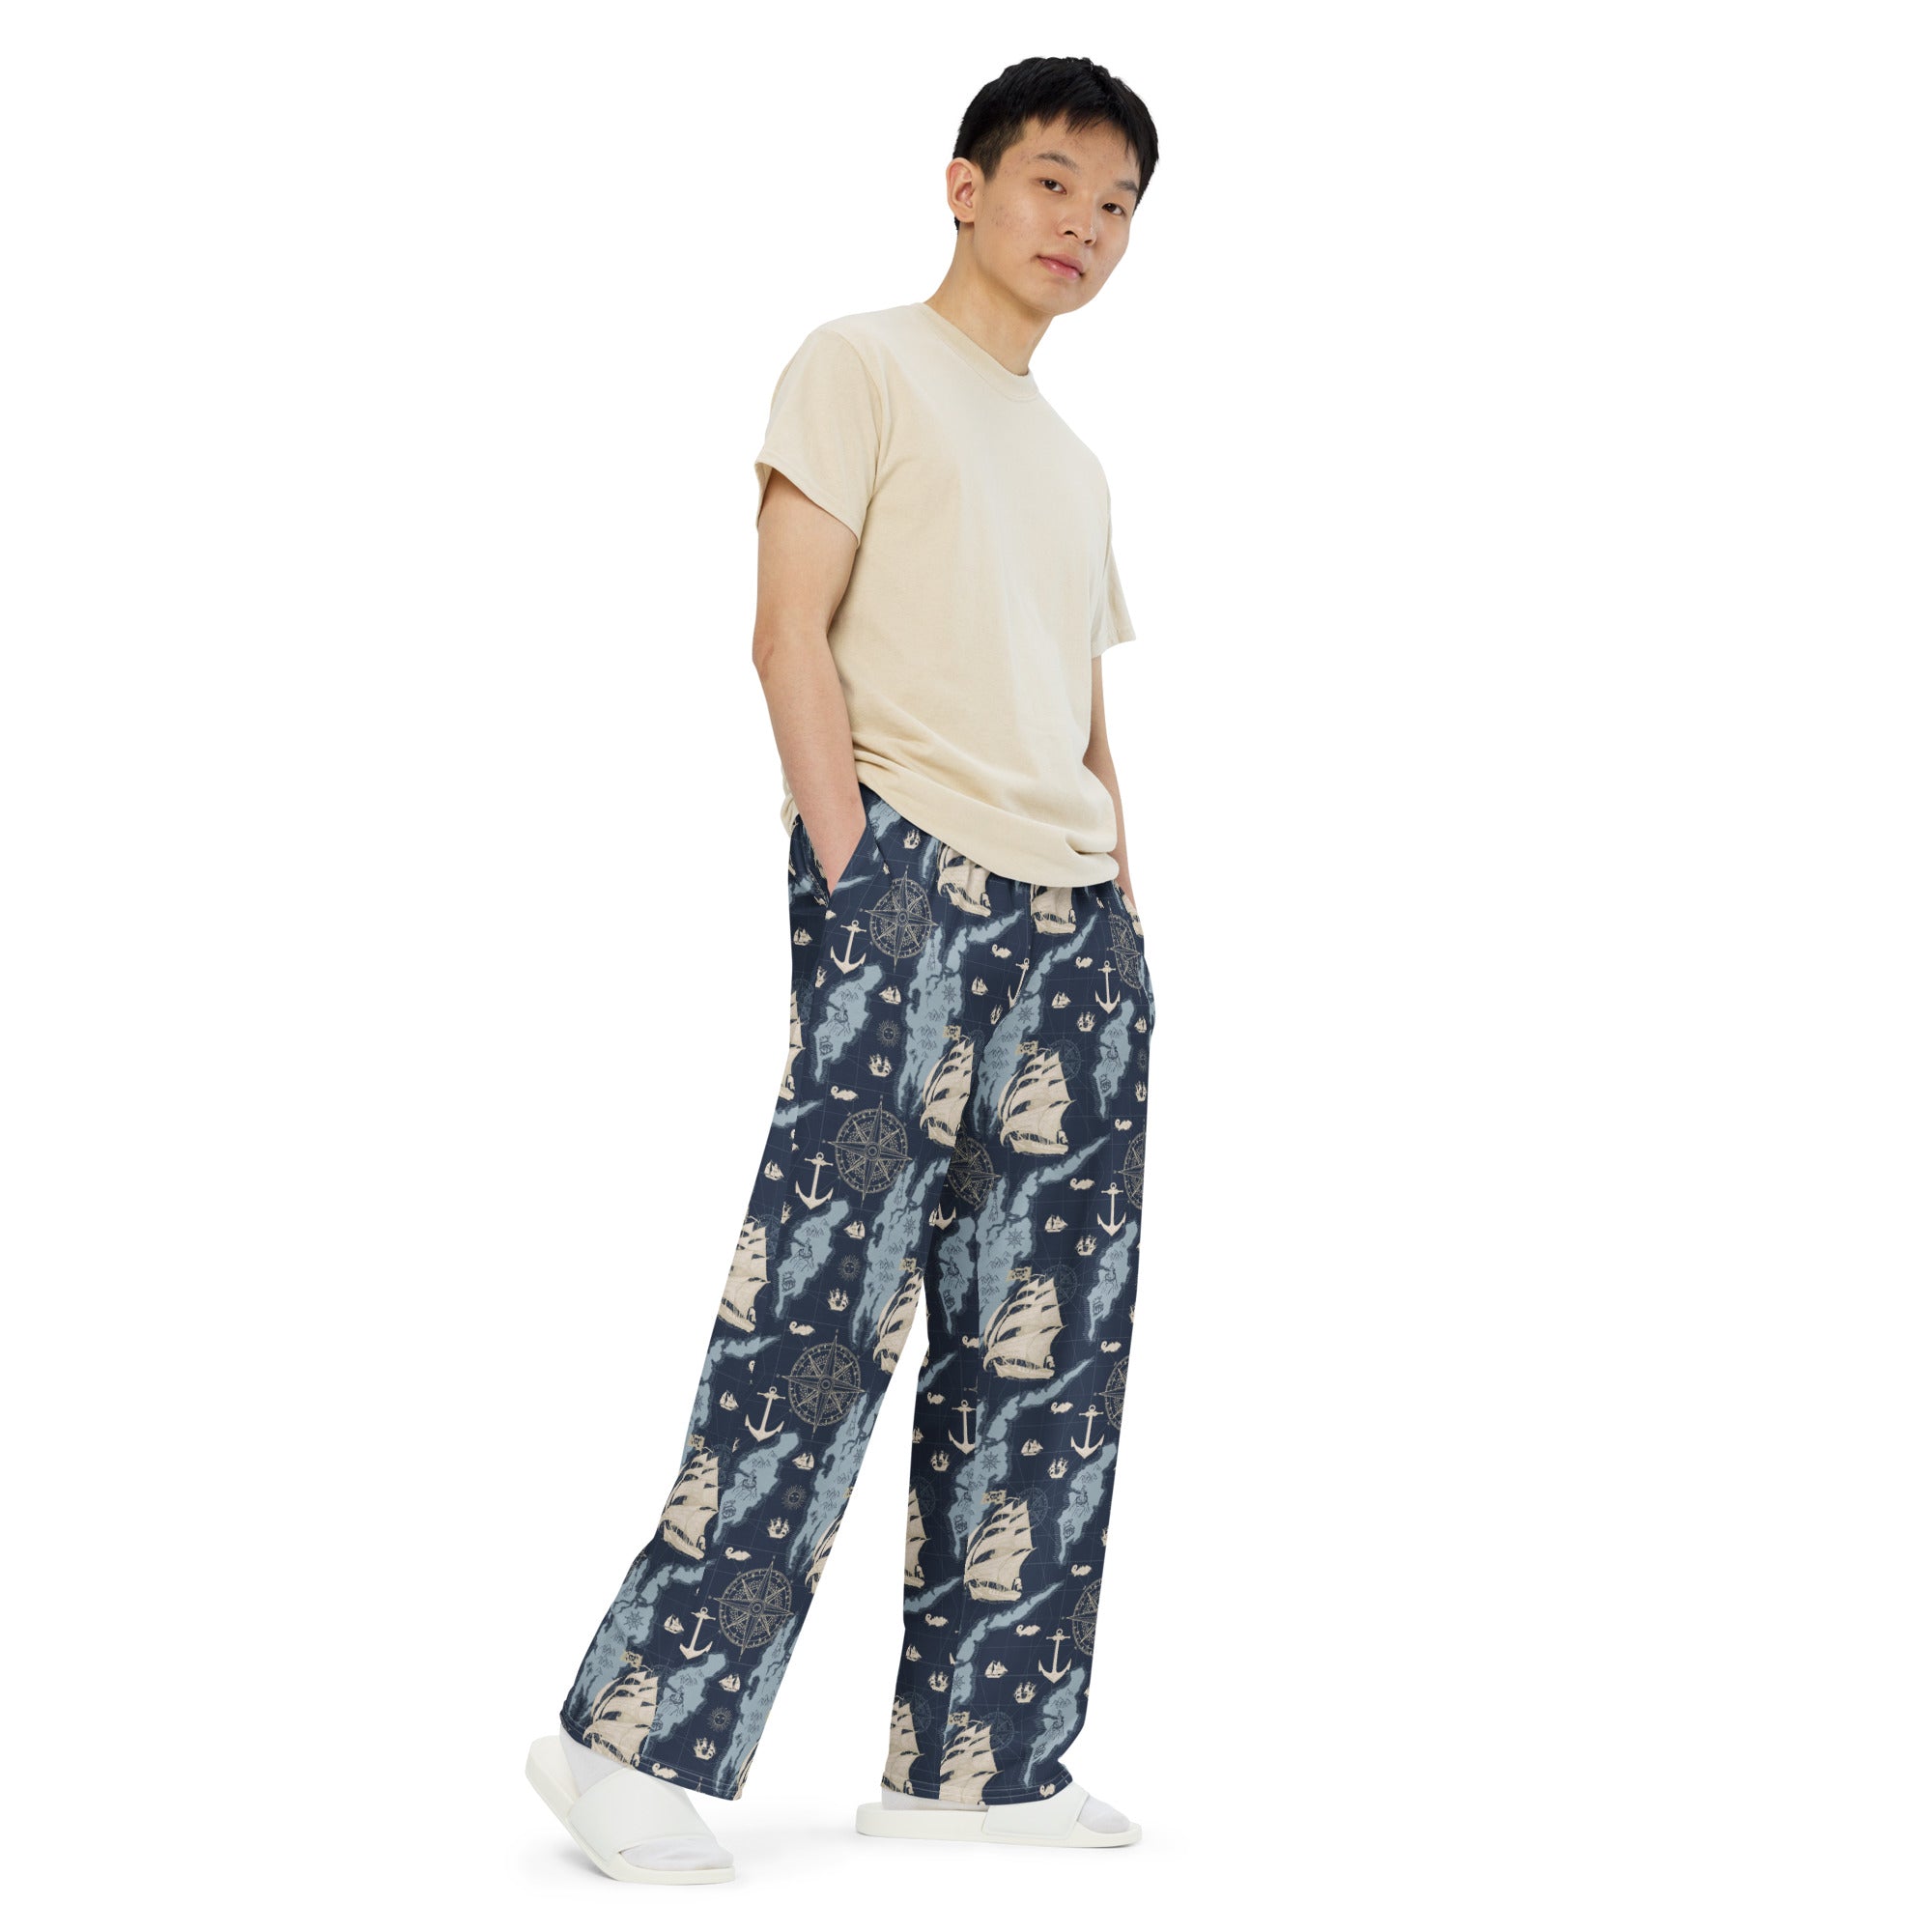 Loose-Fit Lounge Pants - There Be Monsters